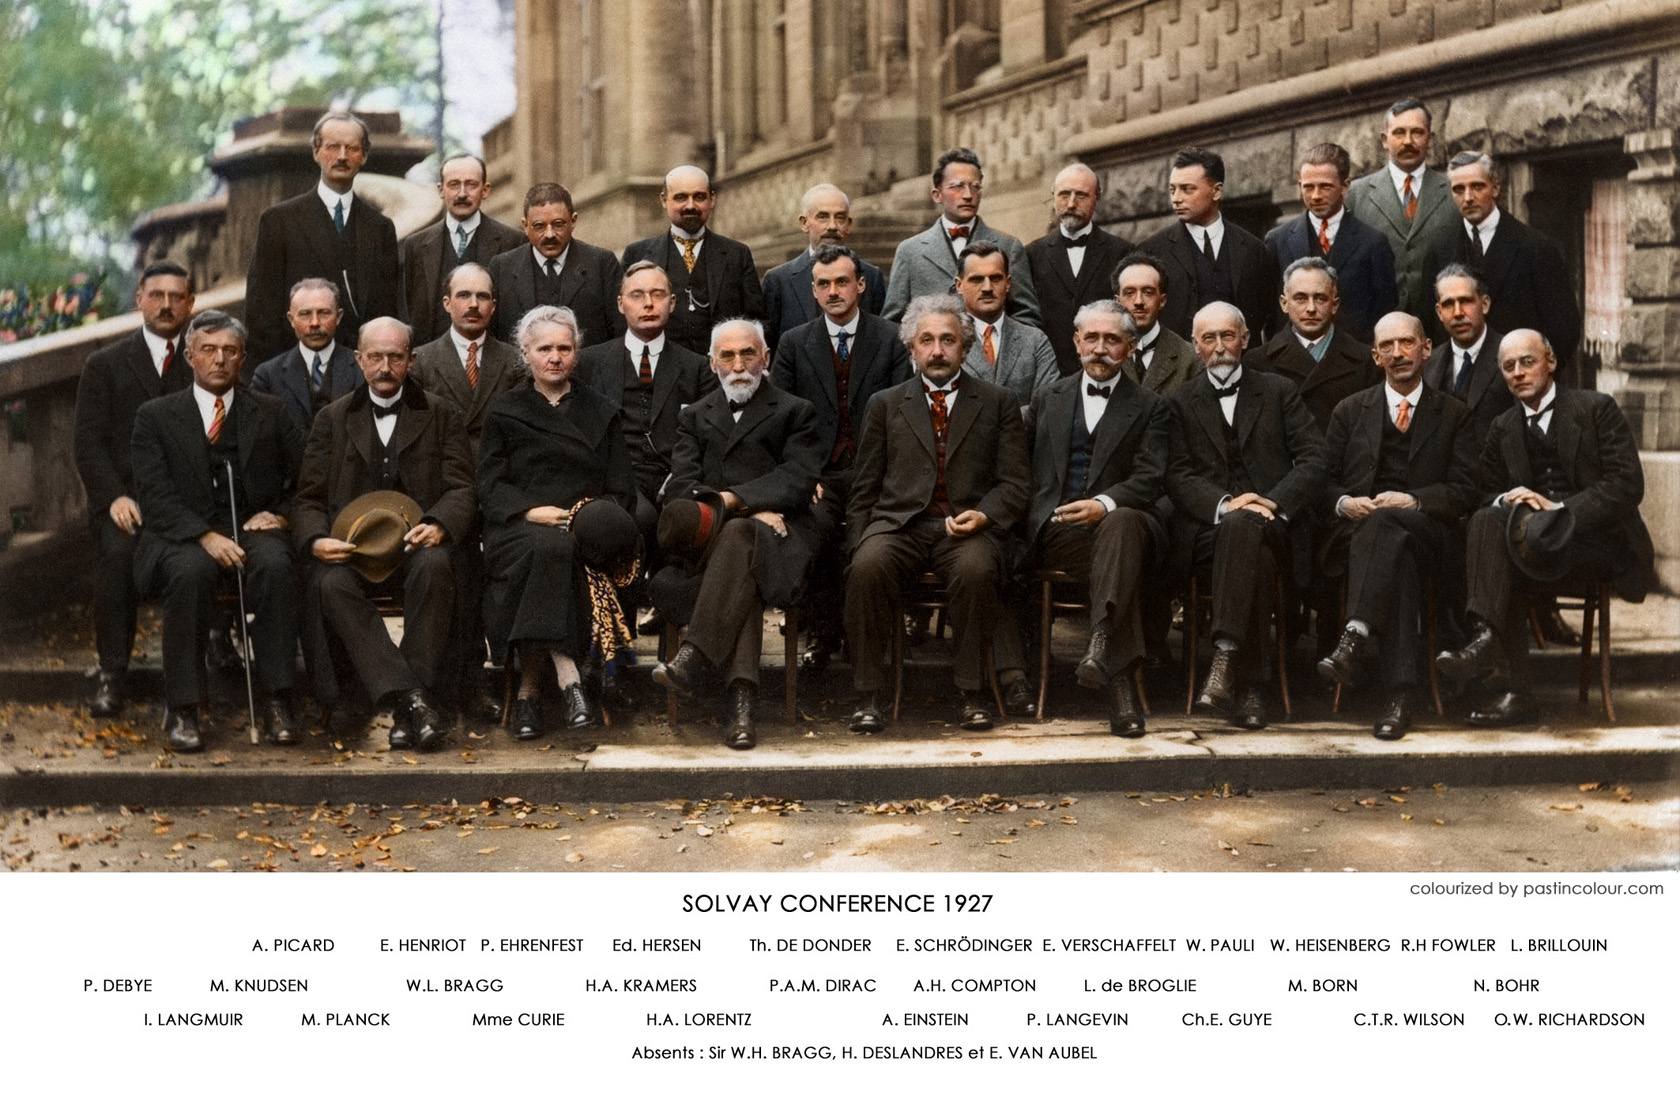 solvay-conference-1927-colourized-einstein